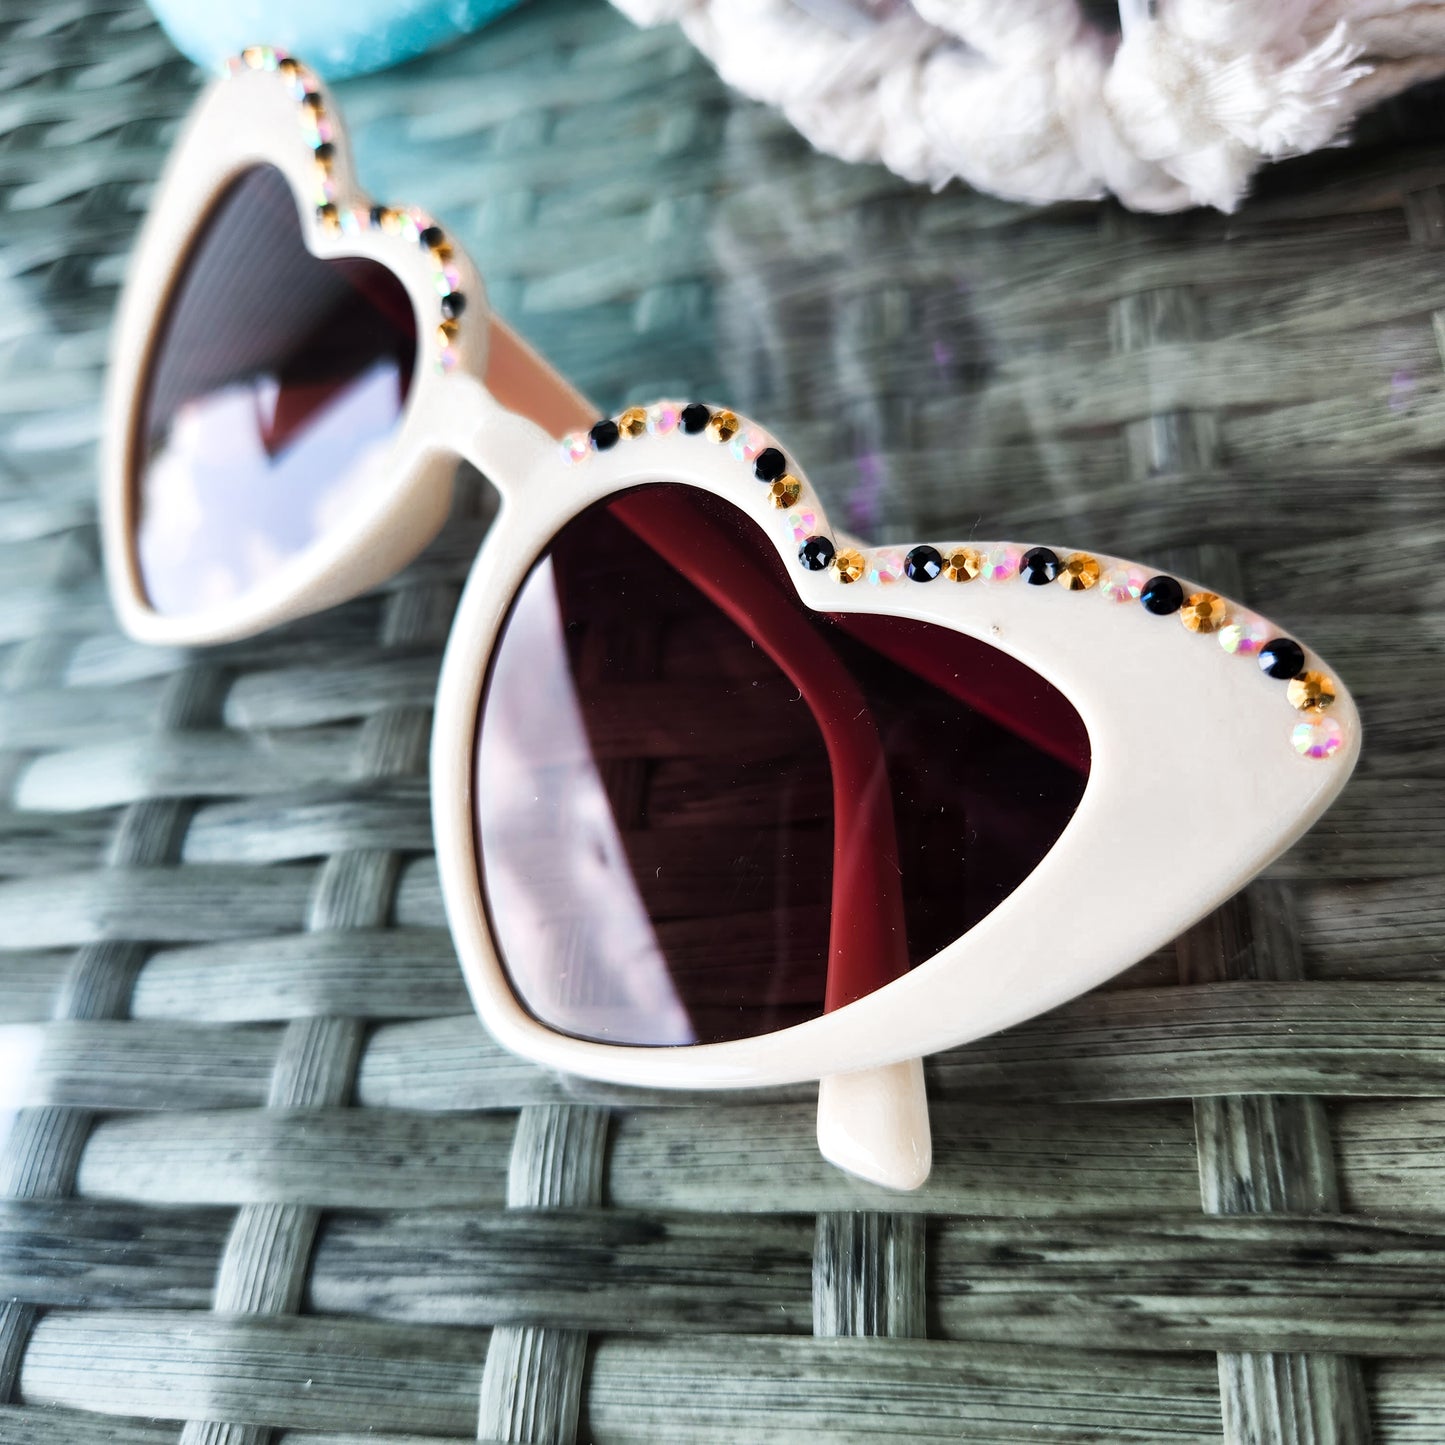 Ivory Heart Shaped Sunnies with Black, Gold, and Multicolor Rhinestone Accents